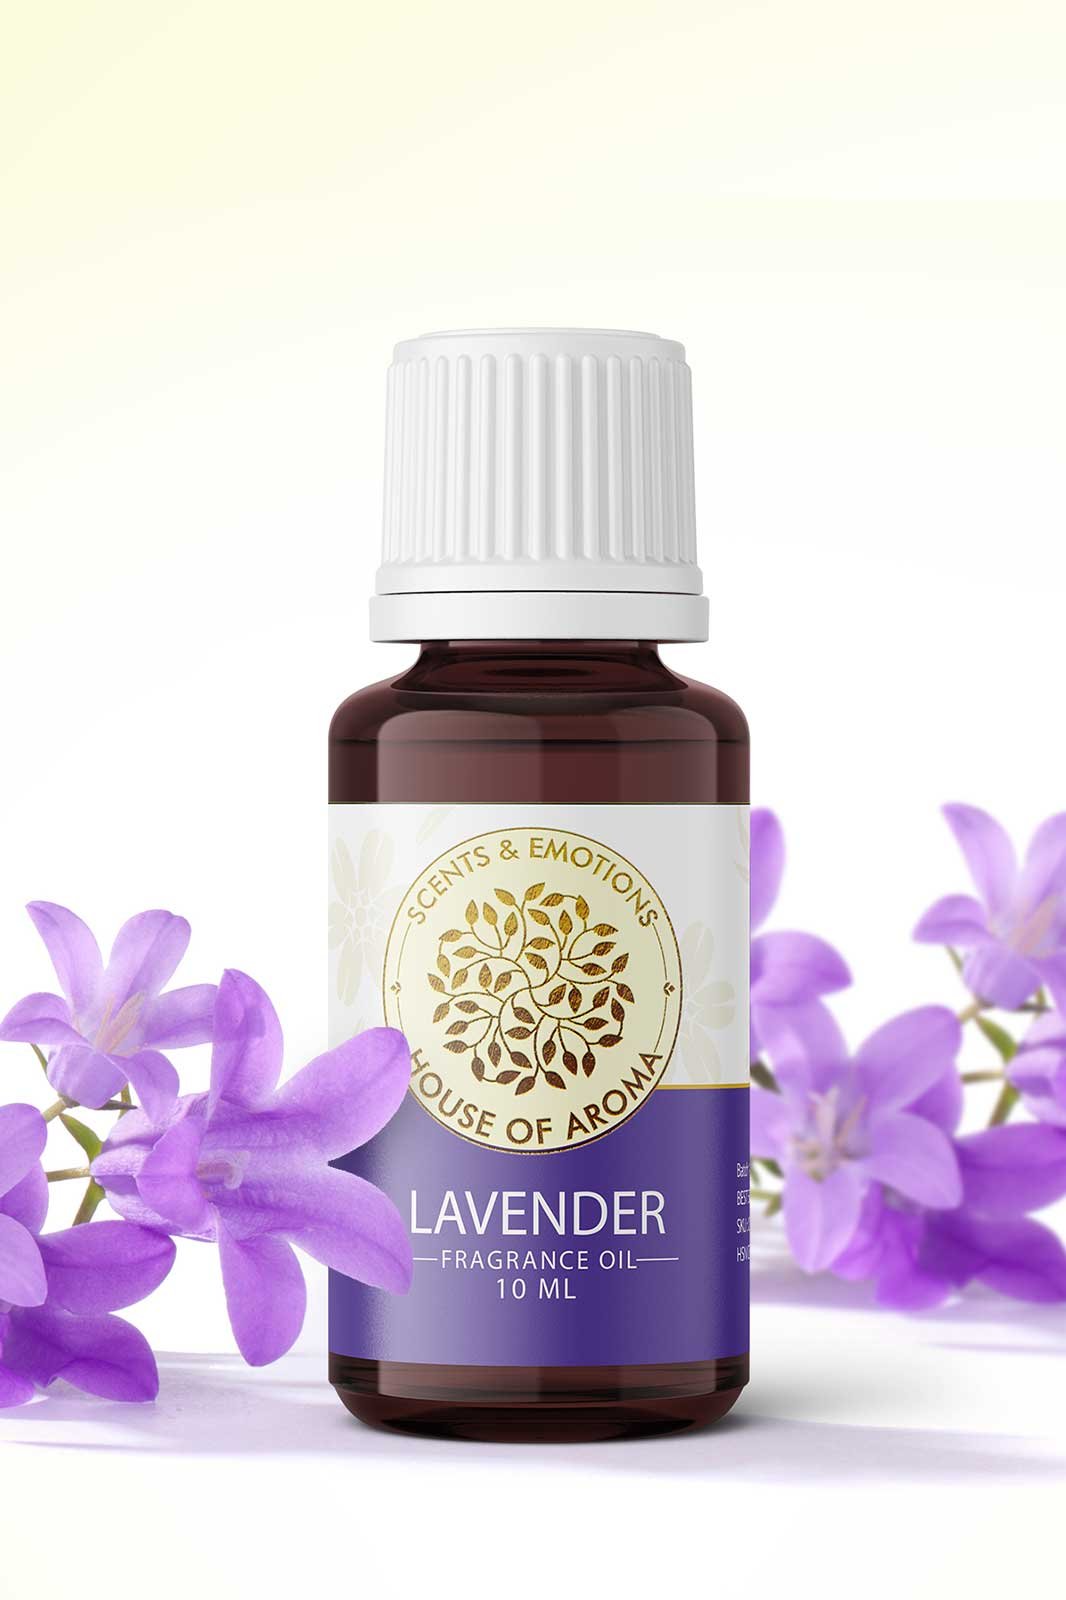 Fragrance Oil, Aroma oil, Synthetic oils, Fragrance oil for candles, oil for diffusers, Aromatic oil, Candle oil, Aromatherapy oil, oil manufacturers, House of Aroma, Lavender Fragrance Oil, Lavender fragrance oil for diffuser, Premium fragrance oil brand, fragrance of lavender, lavender aroma oil, lavender scented oil, lavender scent, lavender aroma, buy fragrance oil online